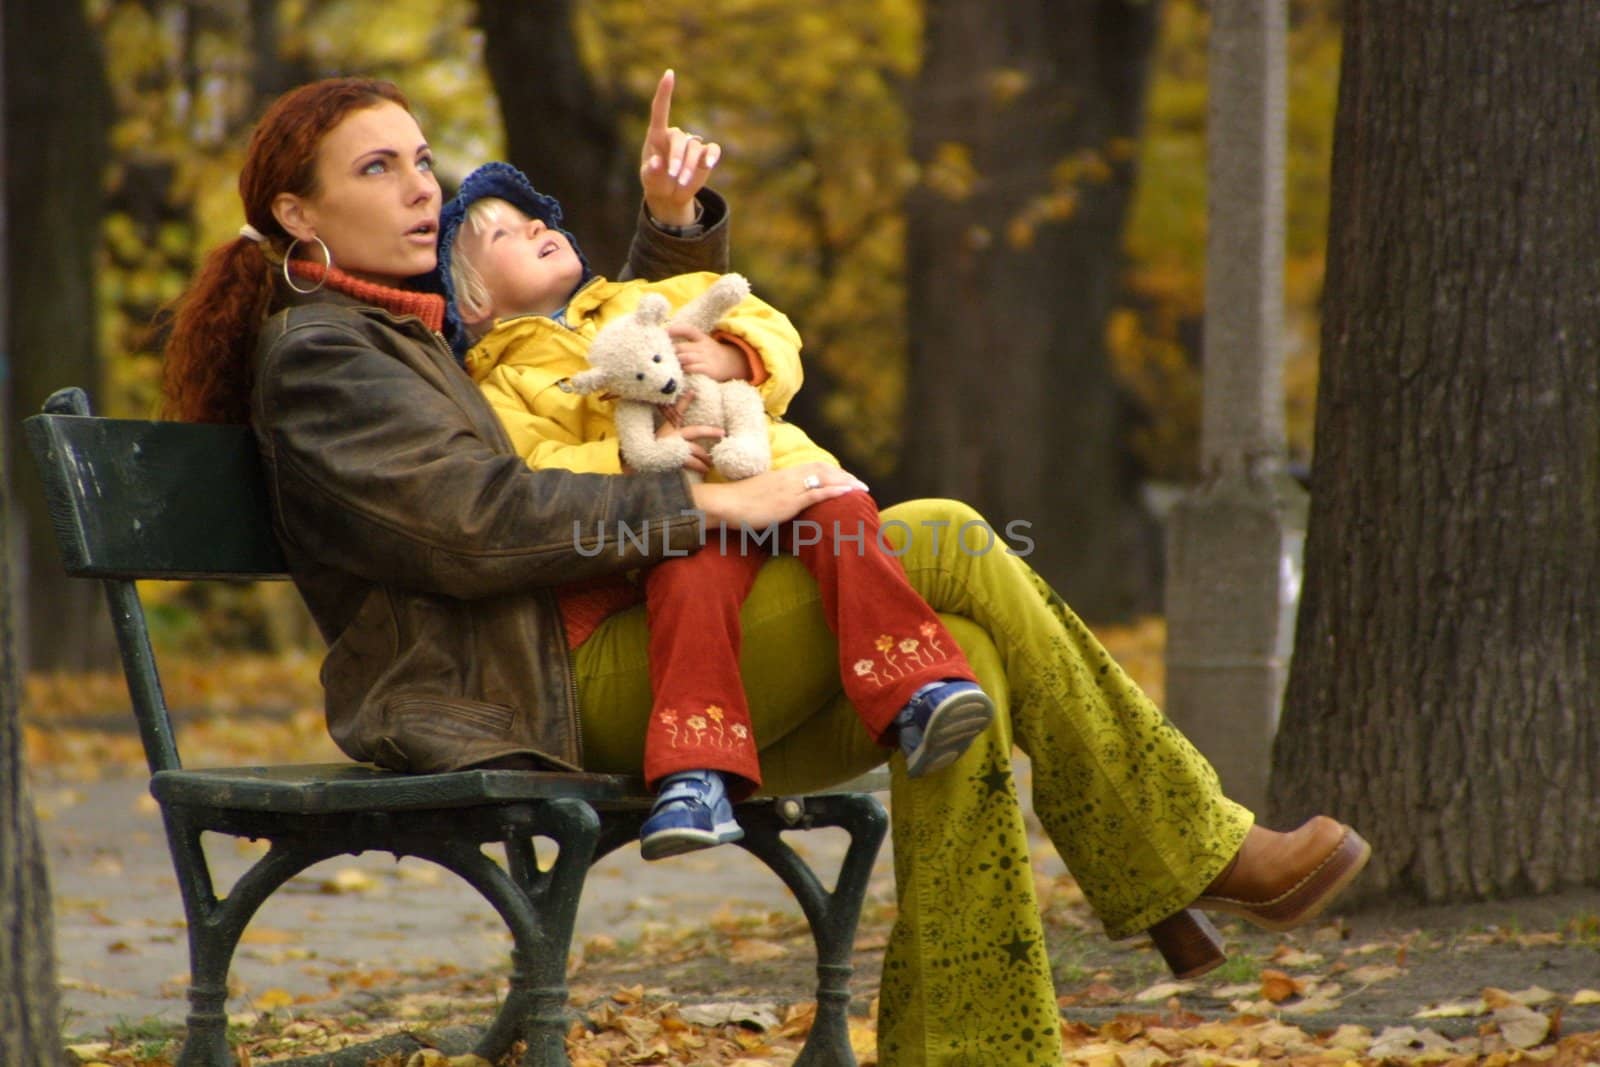 mother with her daughter rested on a bench in autumn